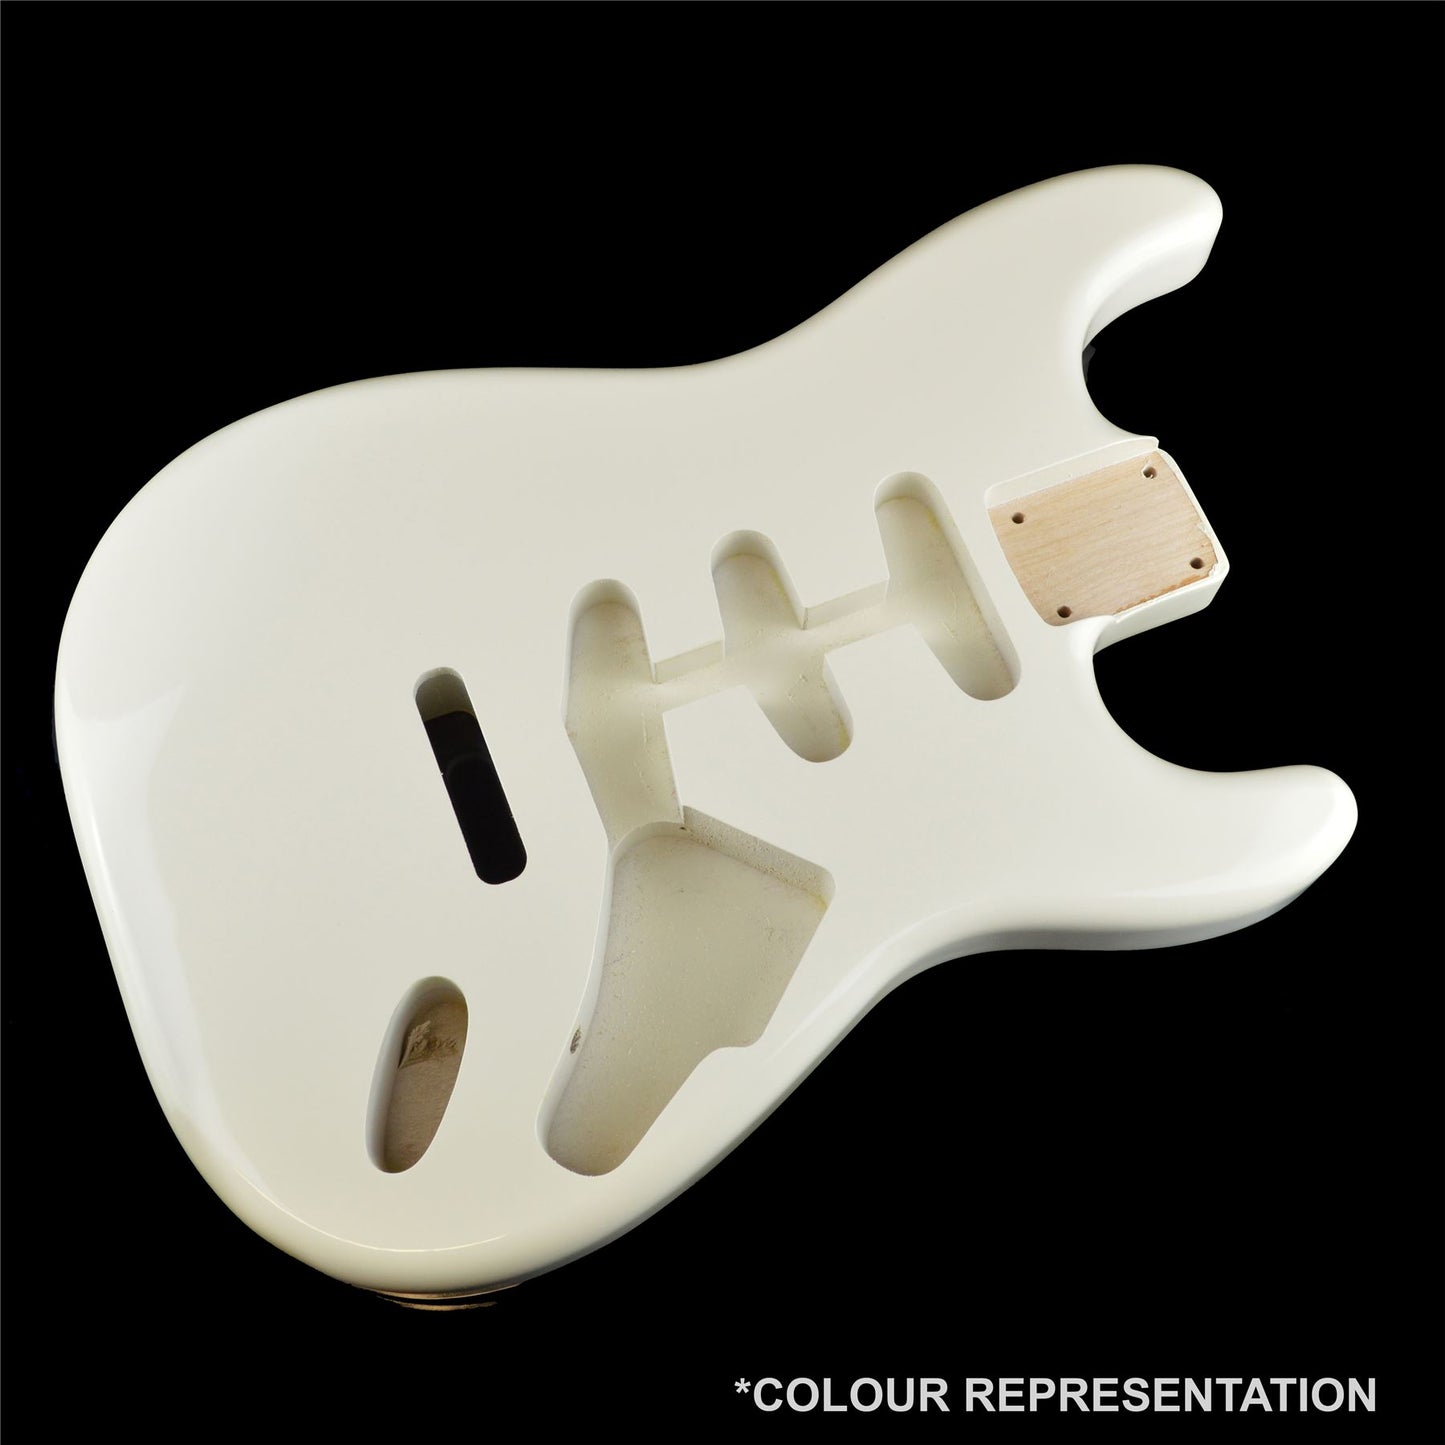 Olympic White Nitrocellulose Chip Repair guitar paint - 50ml